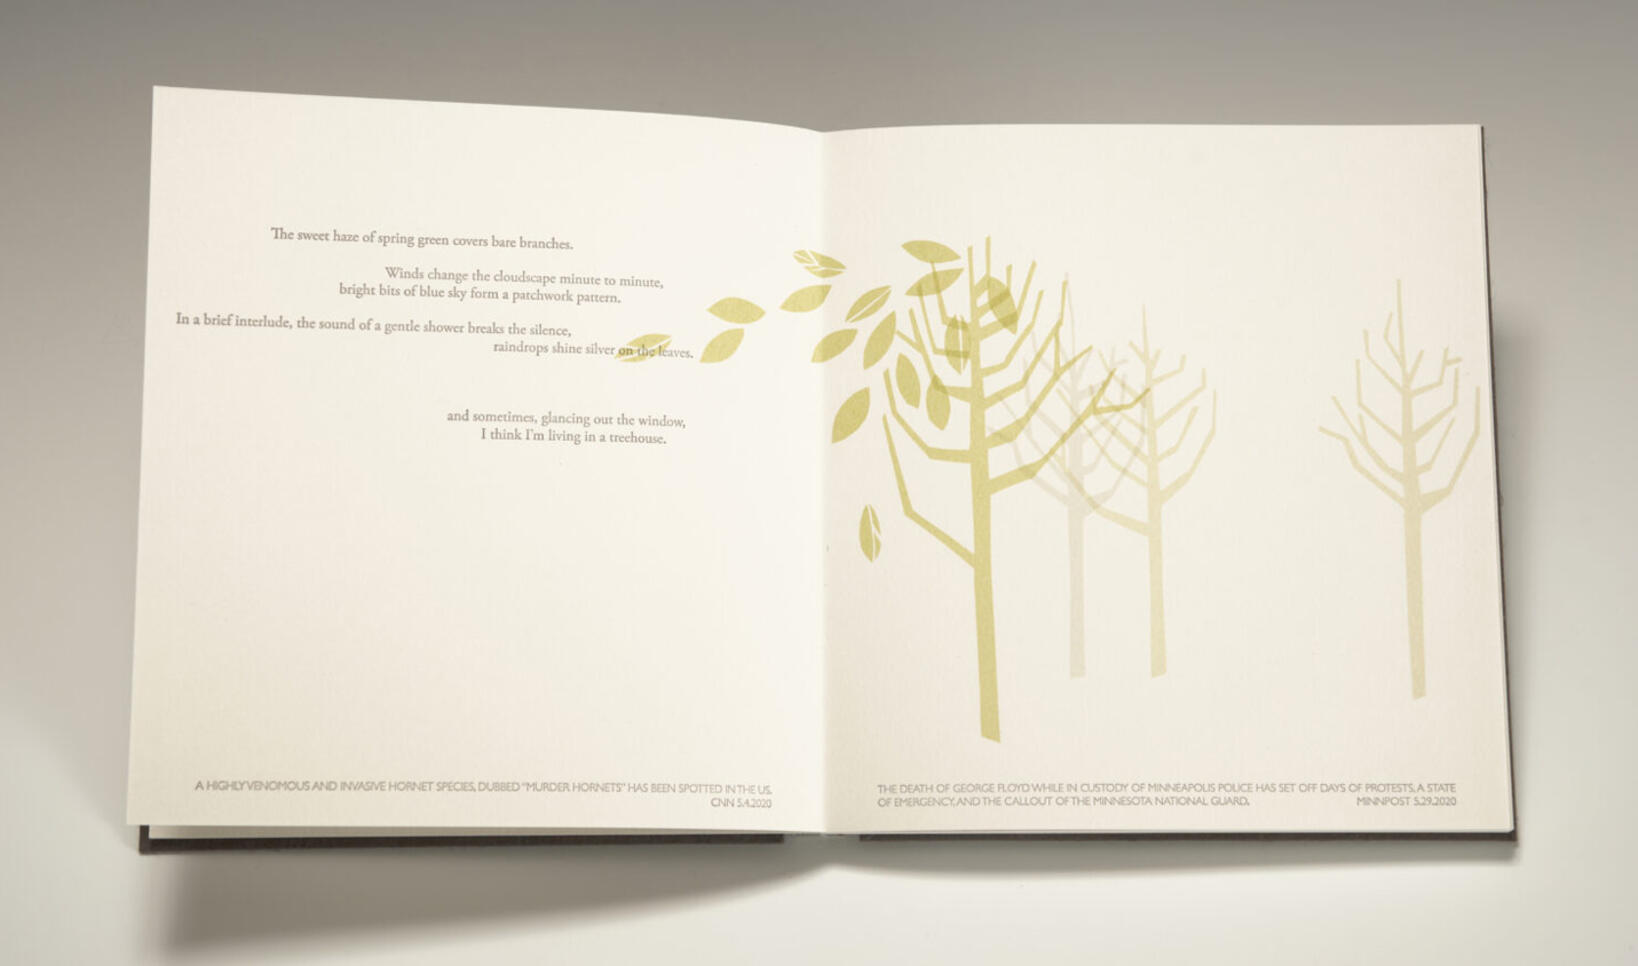 Illustration inside of a book of a tree ; Cathy Ryan